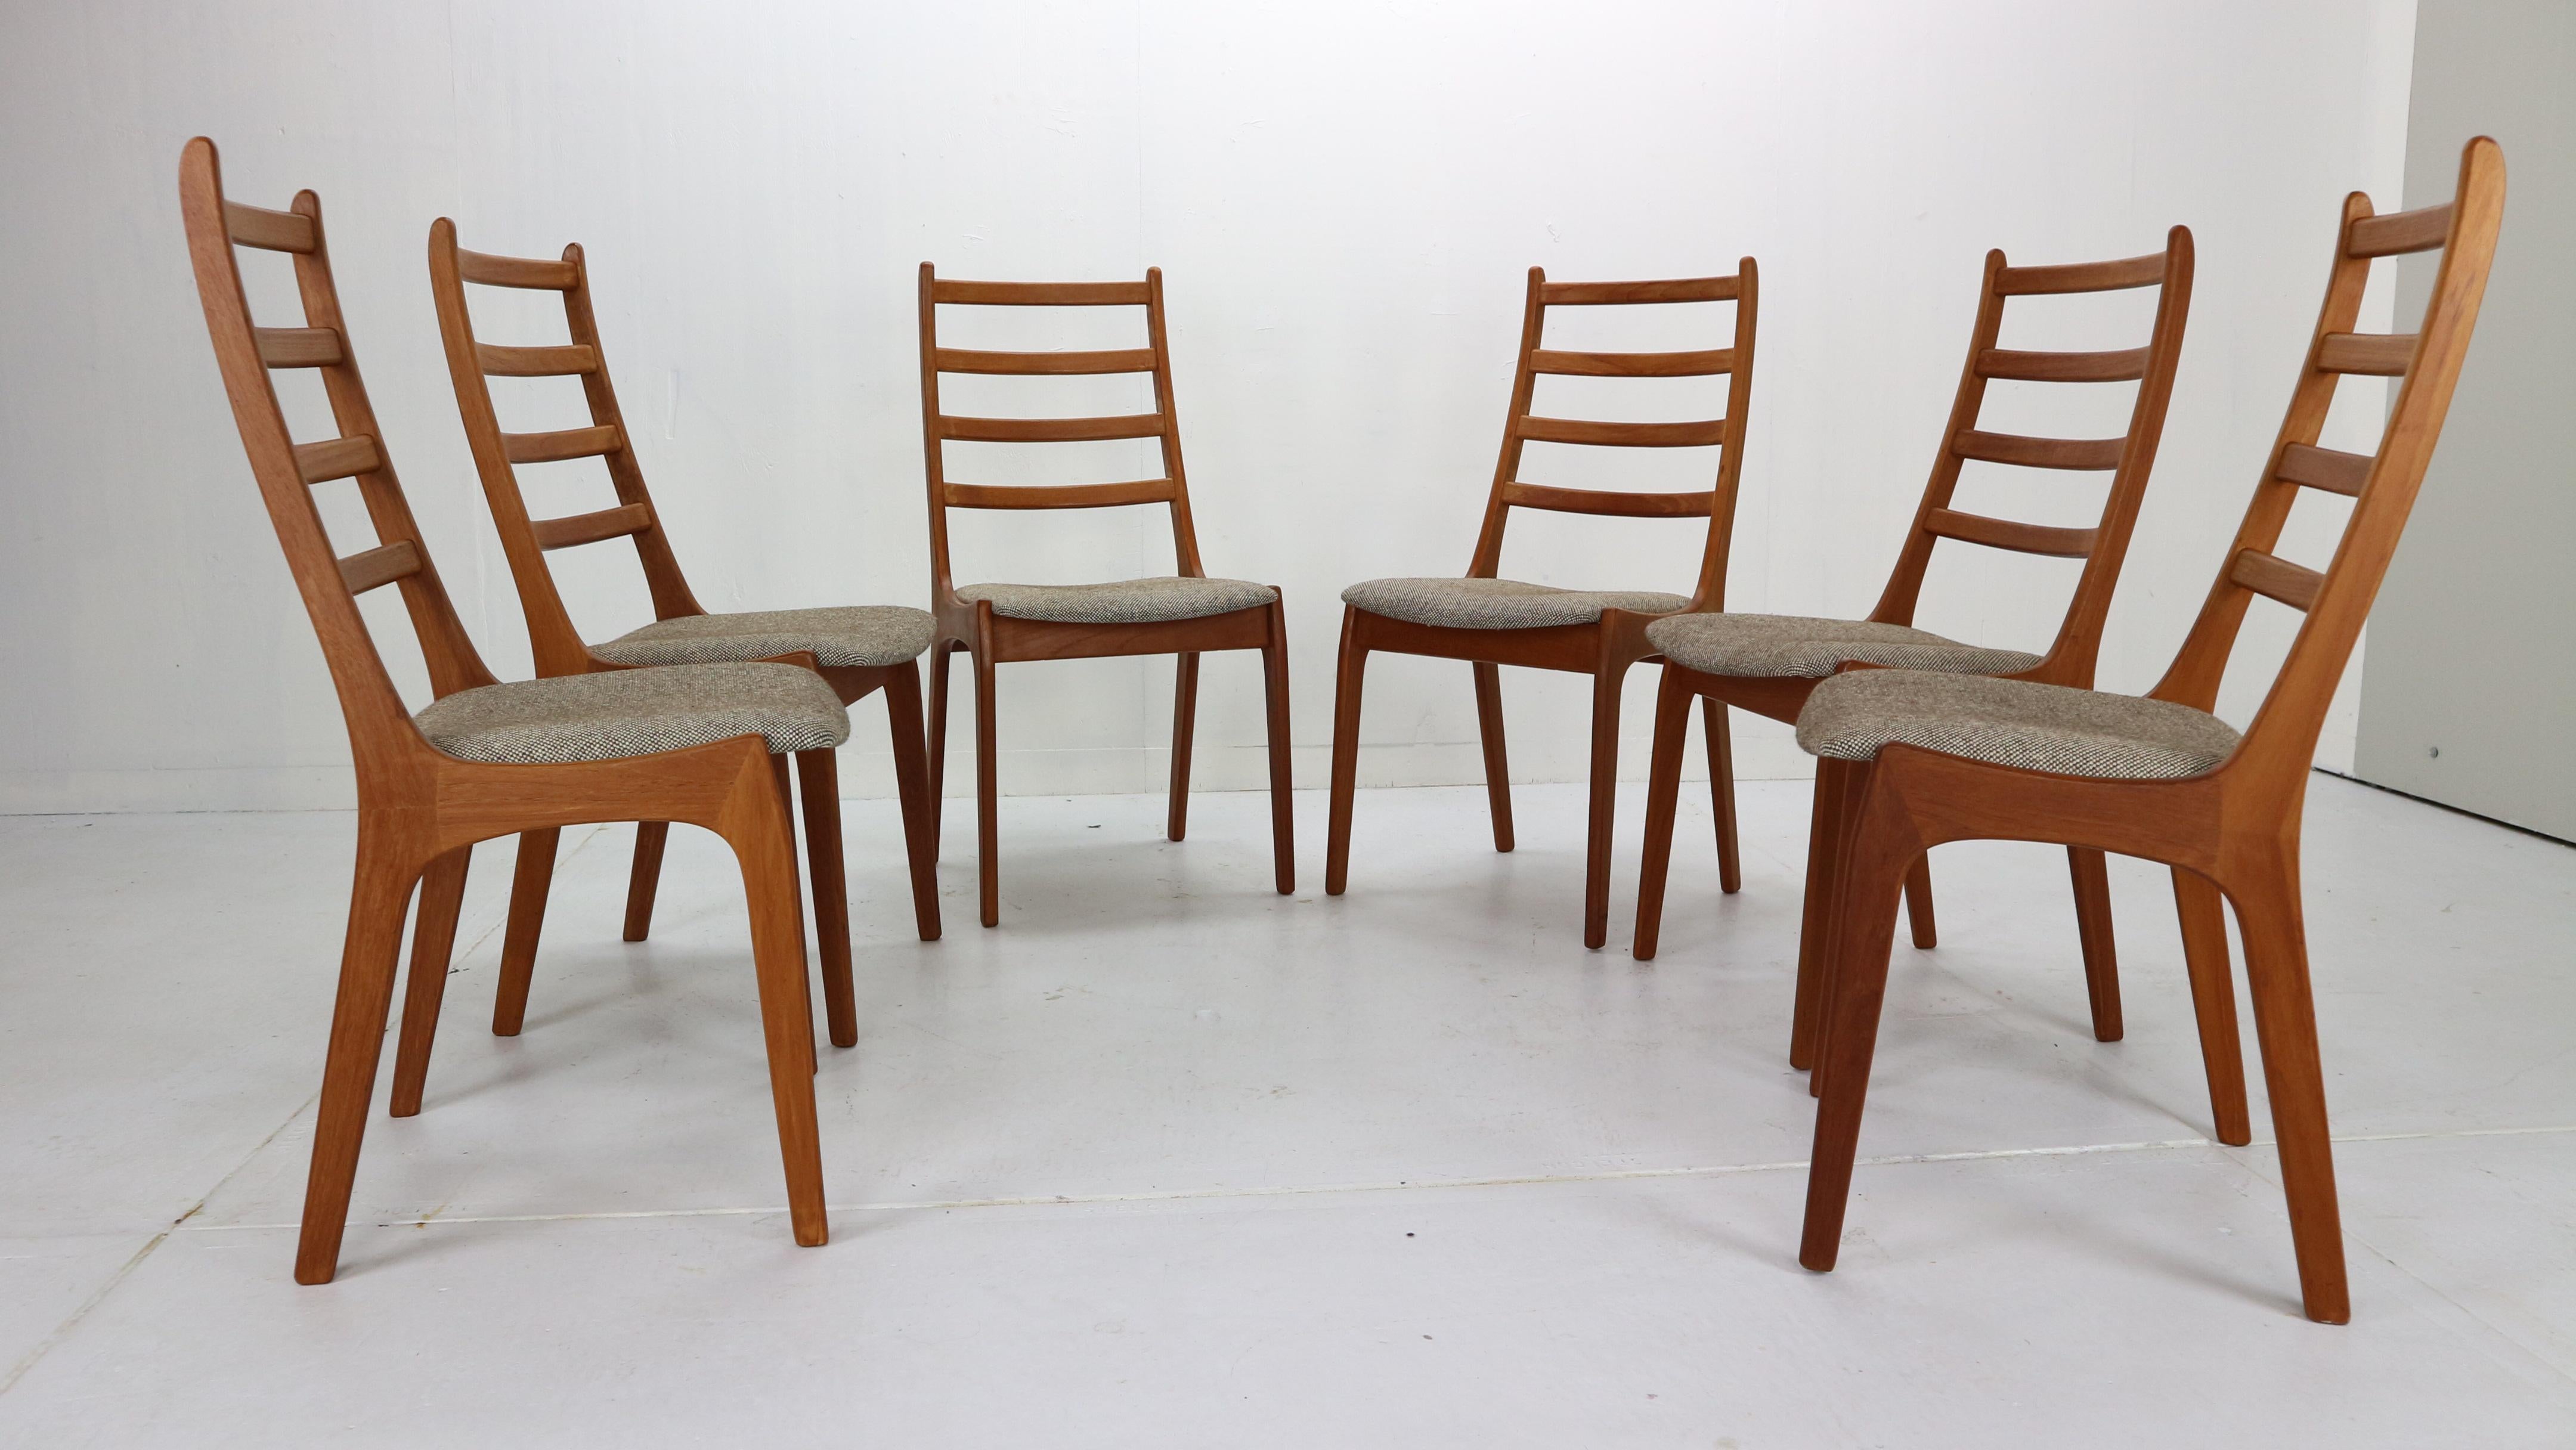 This stunning set of 6 midcentury dining chairs were crafted by high end Danish maker Korup Stolefabrik and designed in 1960s period, Denmark.
Ladder form high backrest and teak curved frame. The seating is in a very good vintage